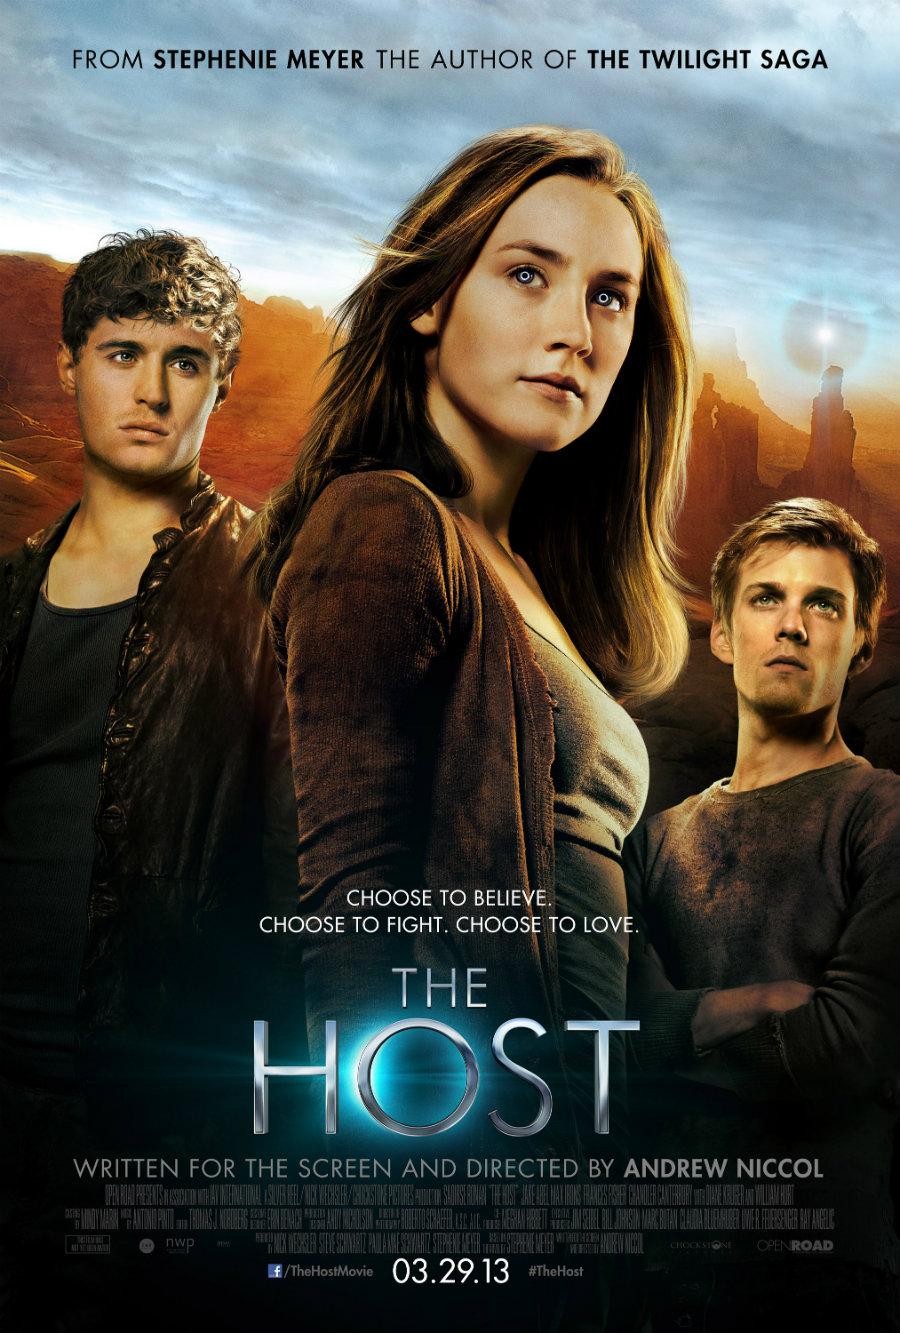 http://meetinthelobby.com/wp-content/uploads/2012/11/The-Host-Movie-Poster-Large.jpg